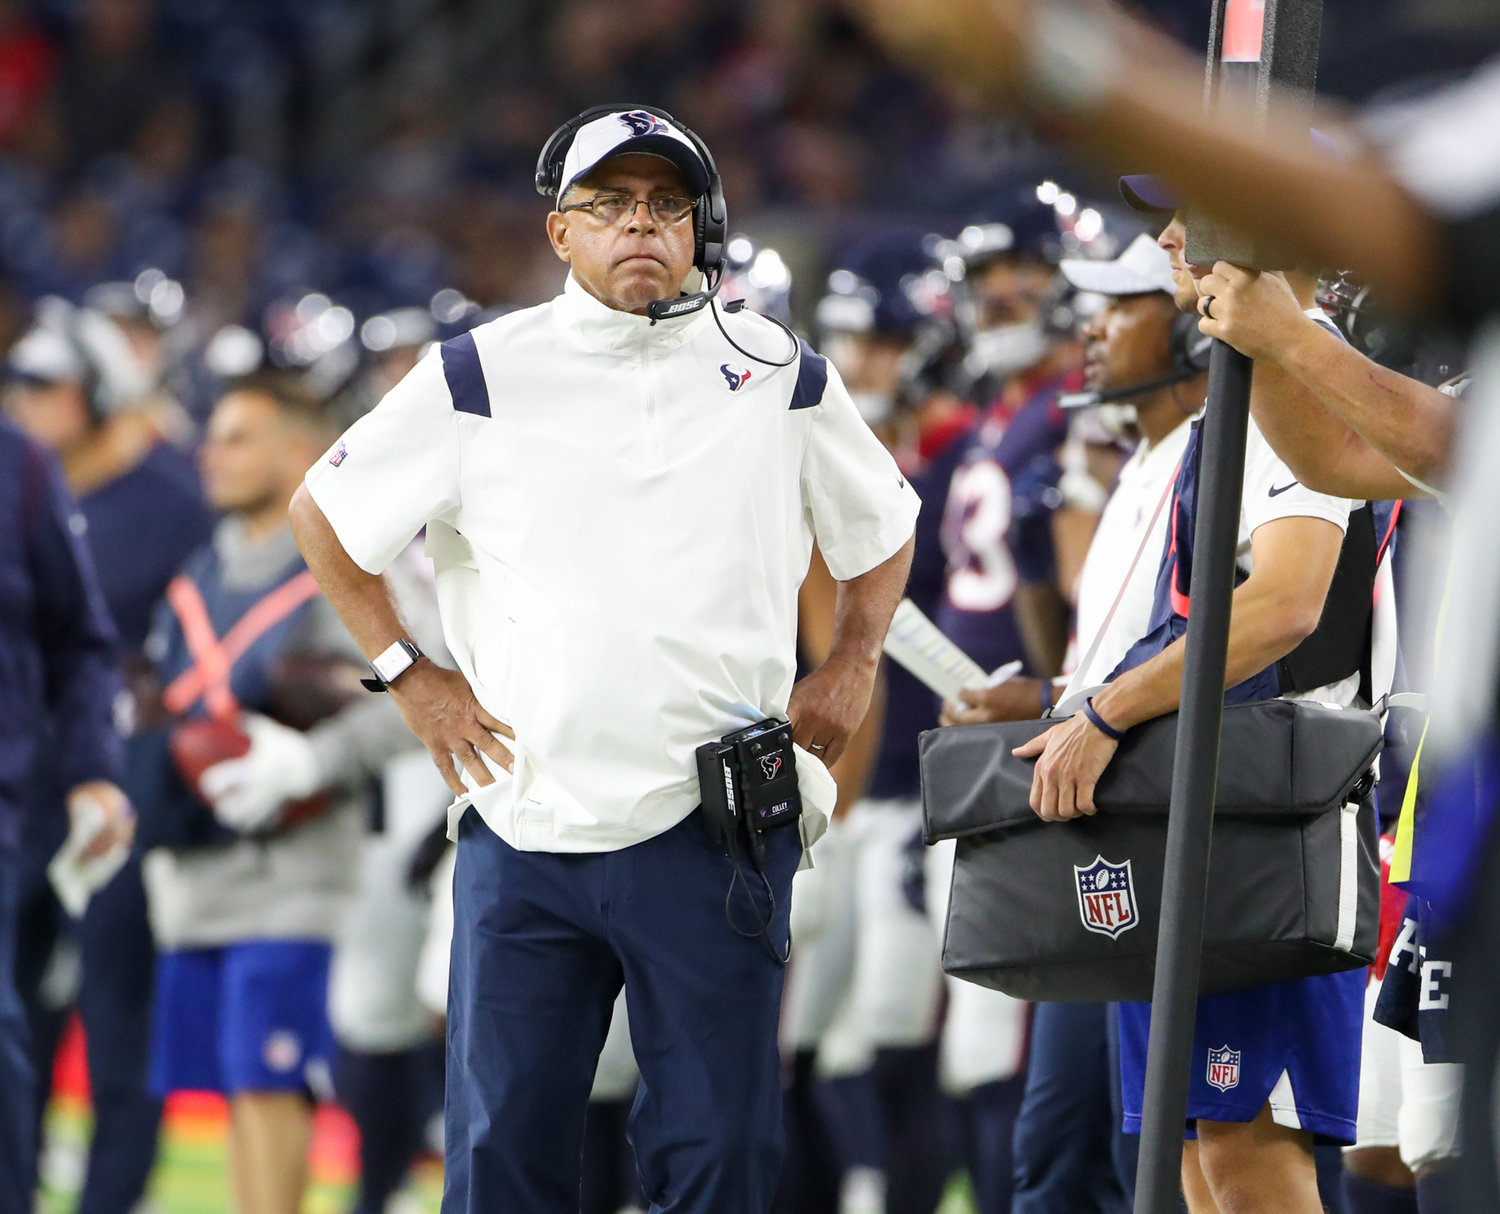 Houston Texans head coach David Culley during an NFL preseason game between the Houston Texans and the Tampa Bay Buccaneers on August 28, 2021 in Houston, Texas.